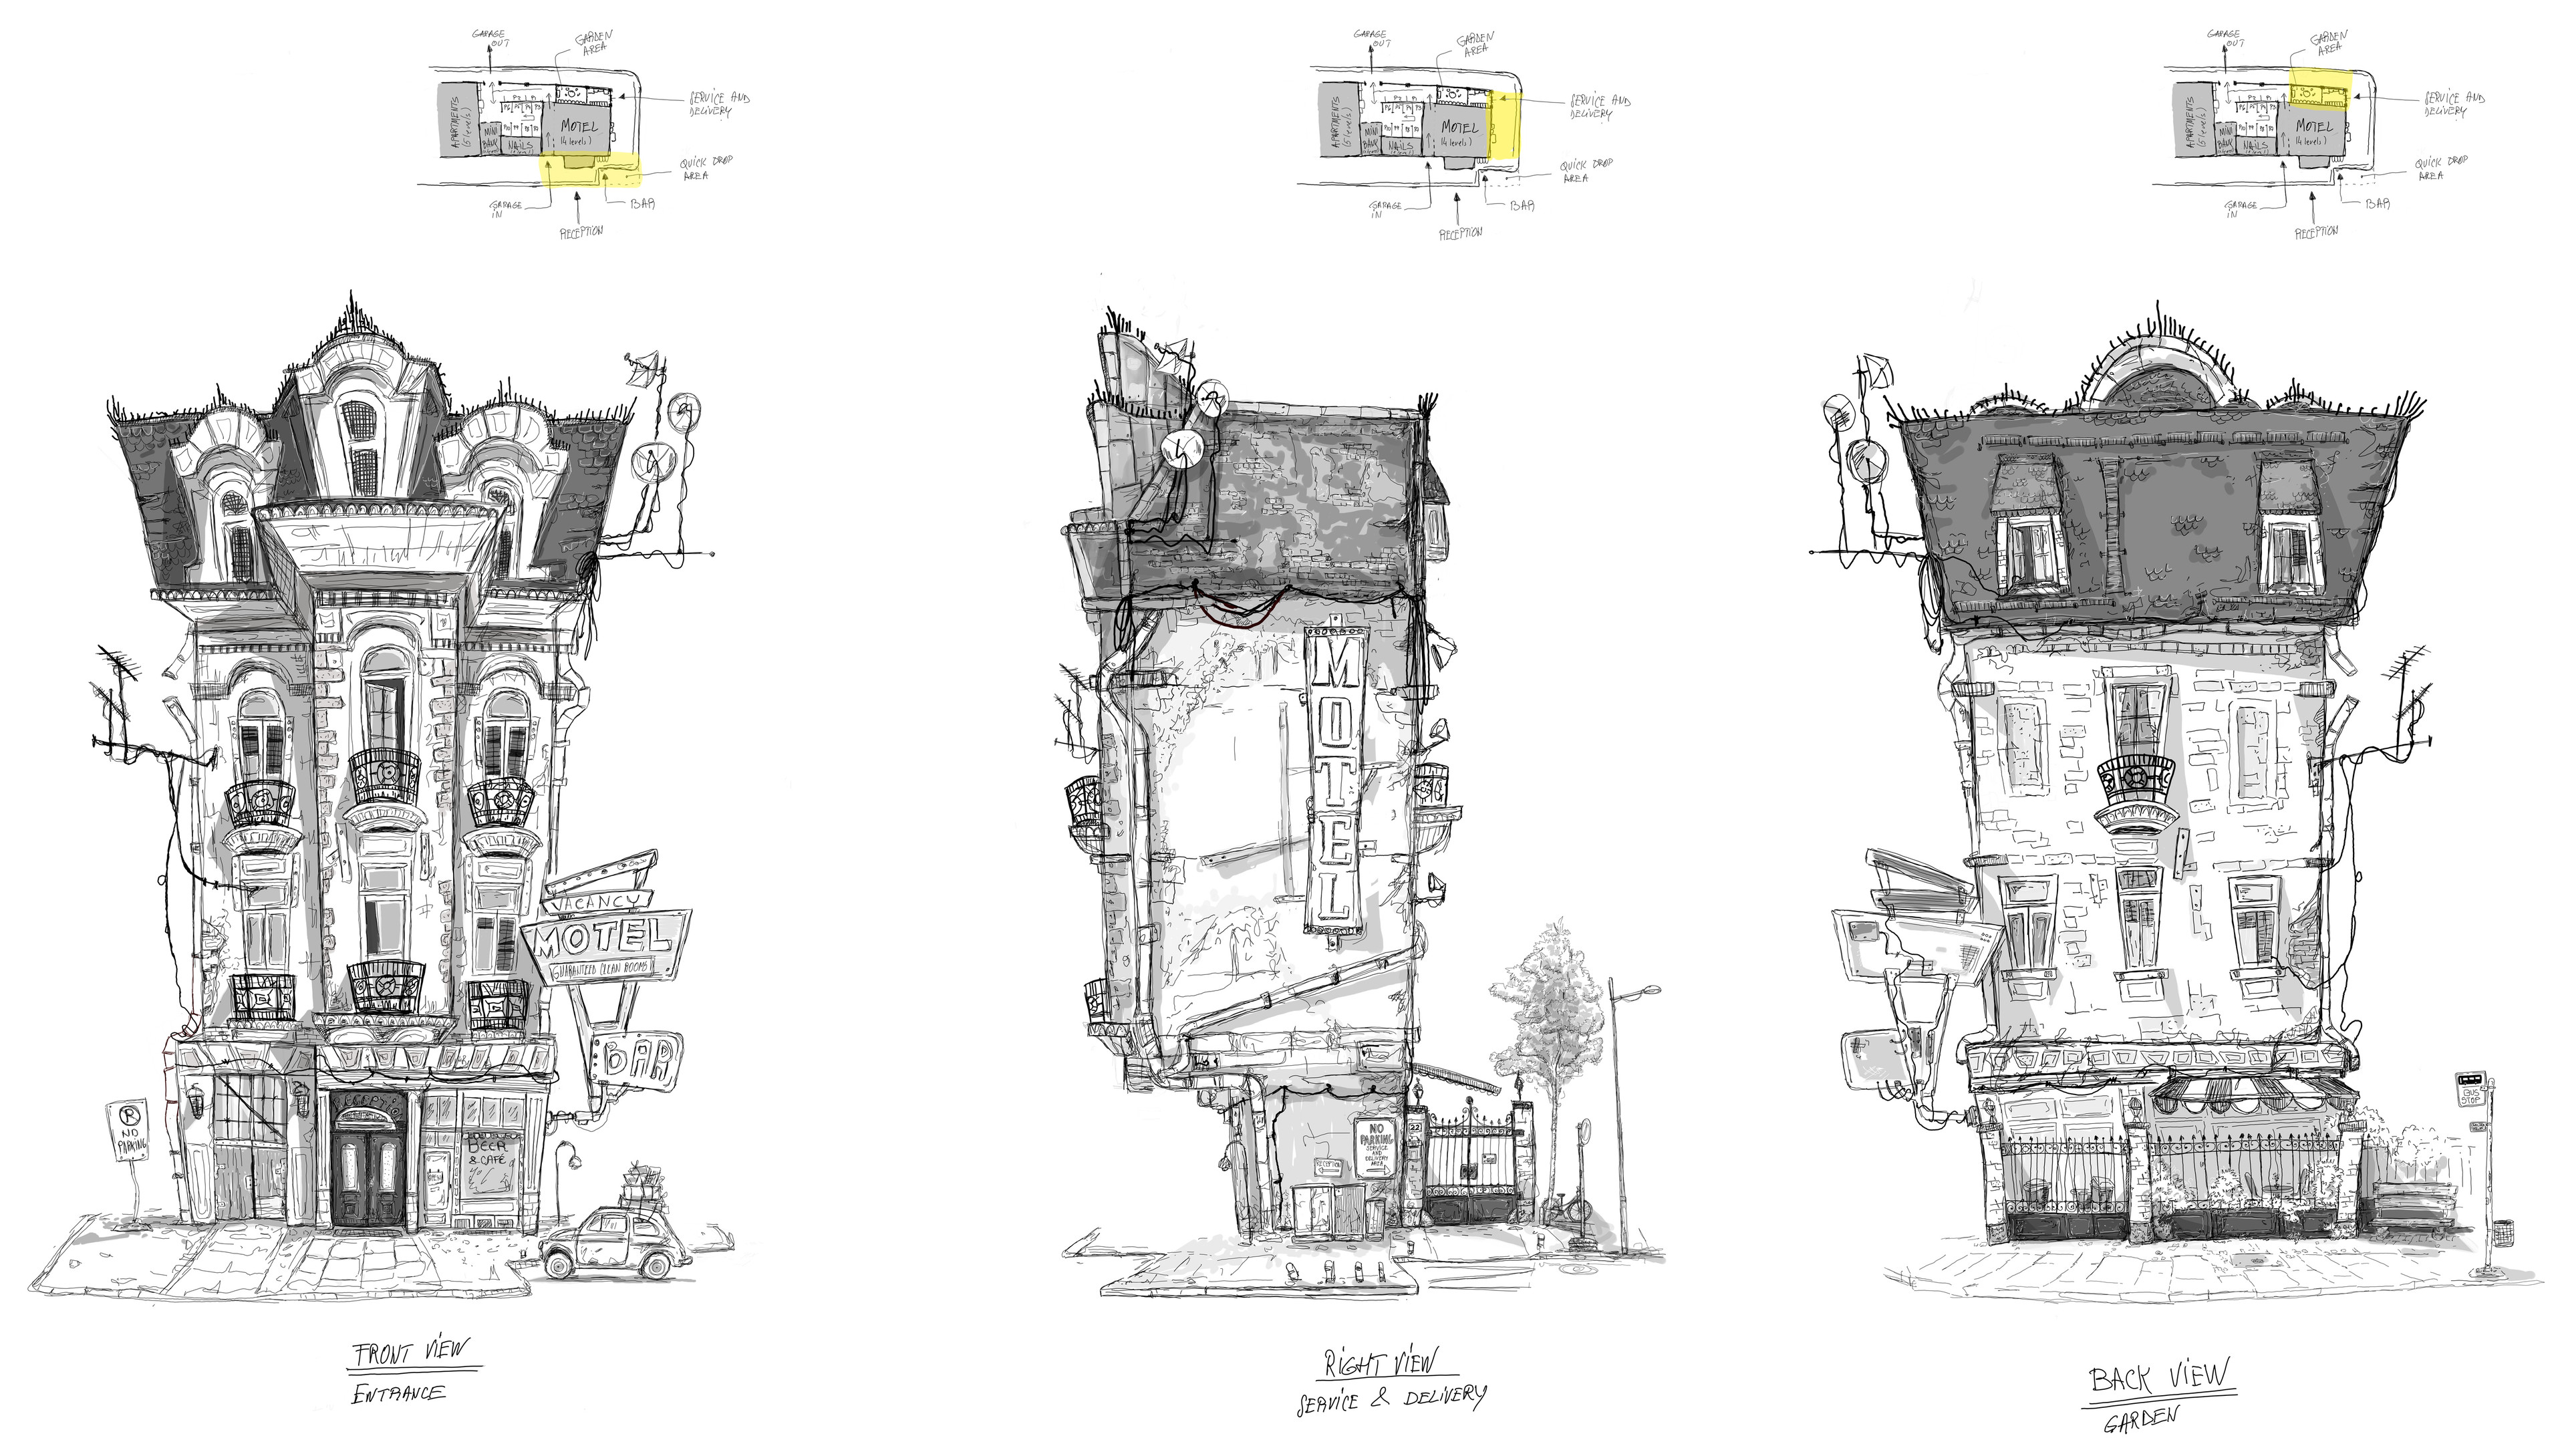 Concept Sketch of the Motel, Front - Right - Back orthographic views